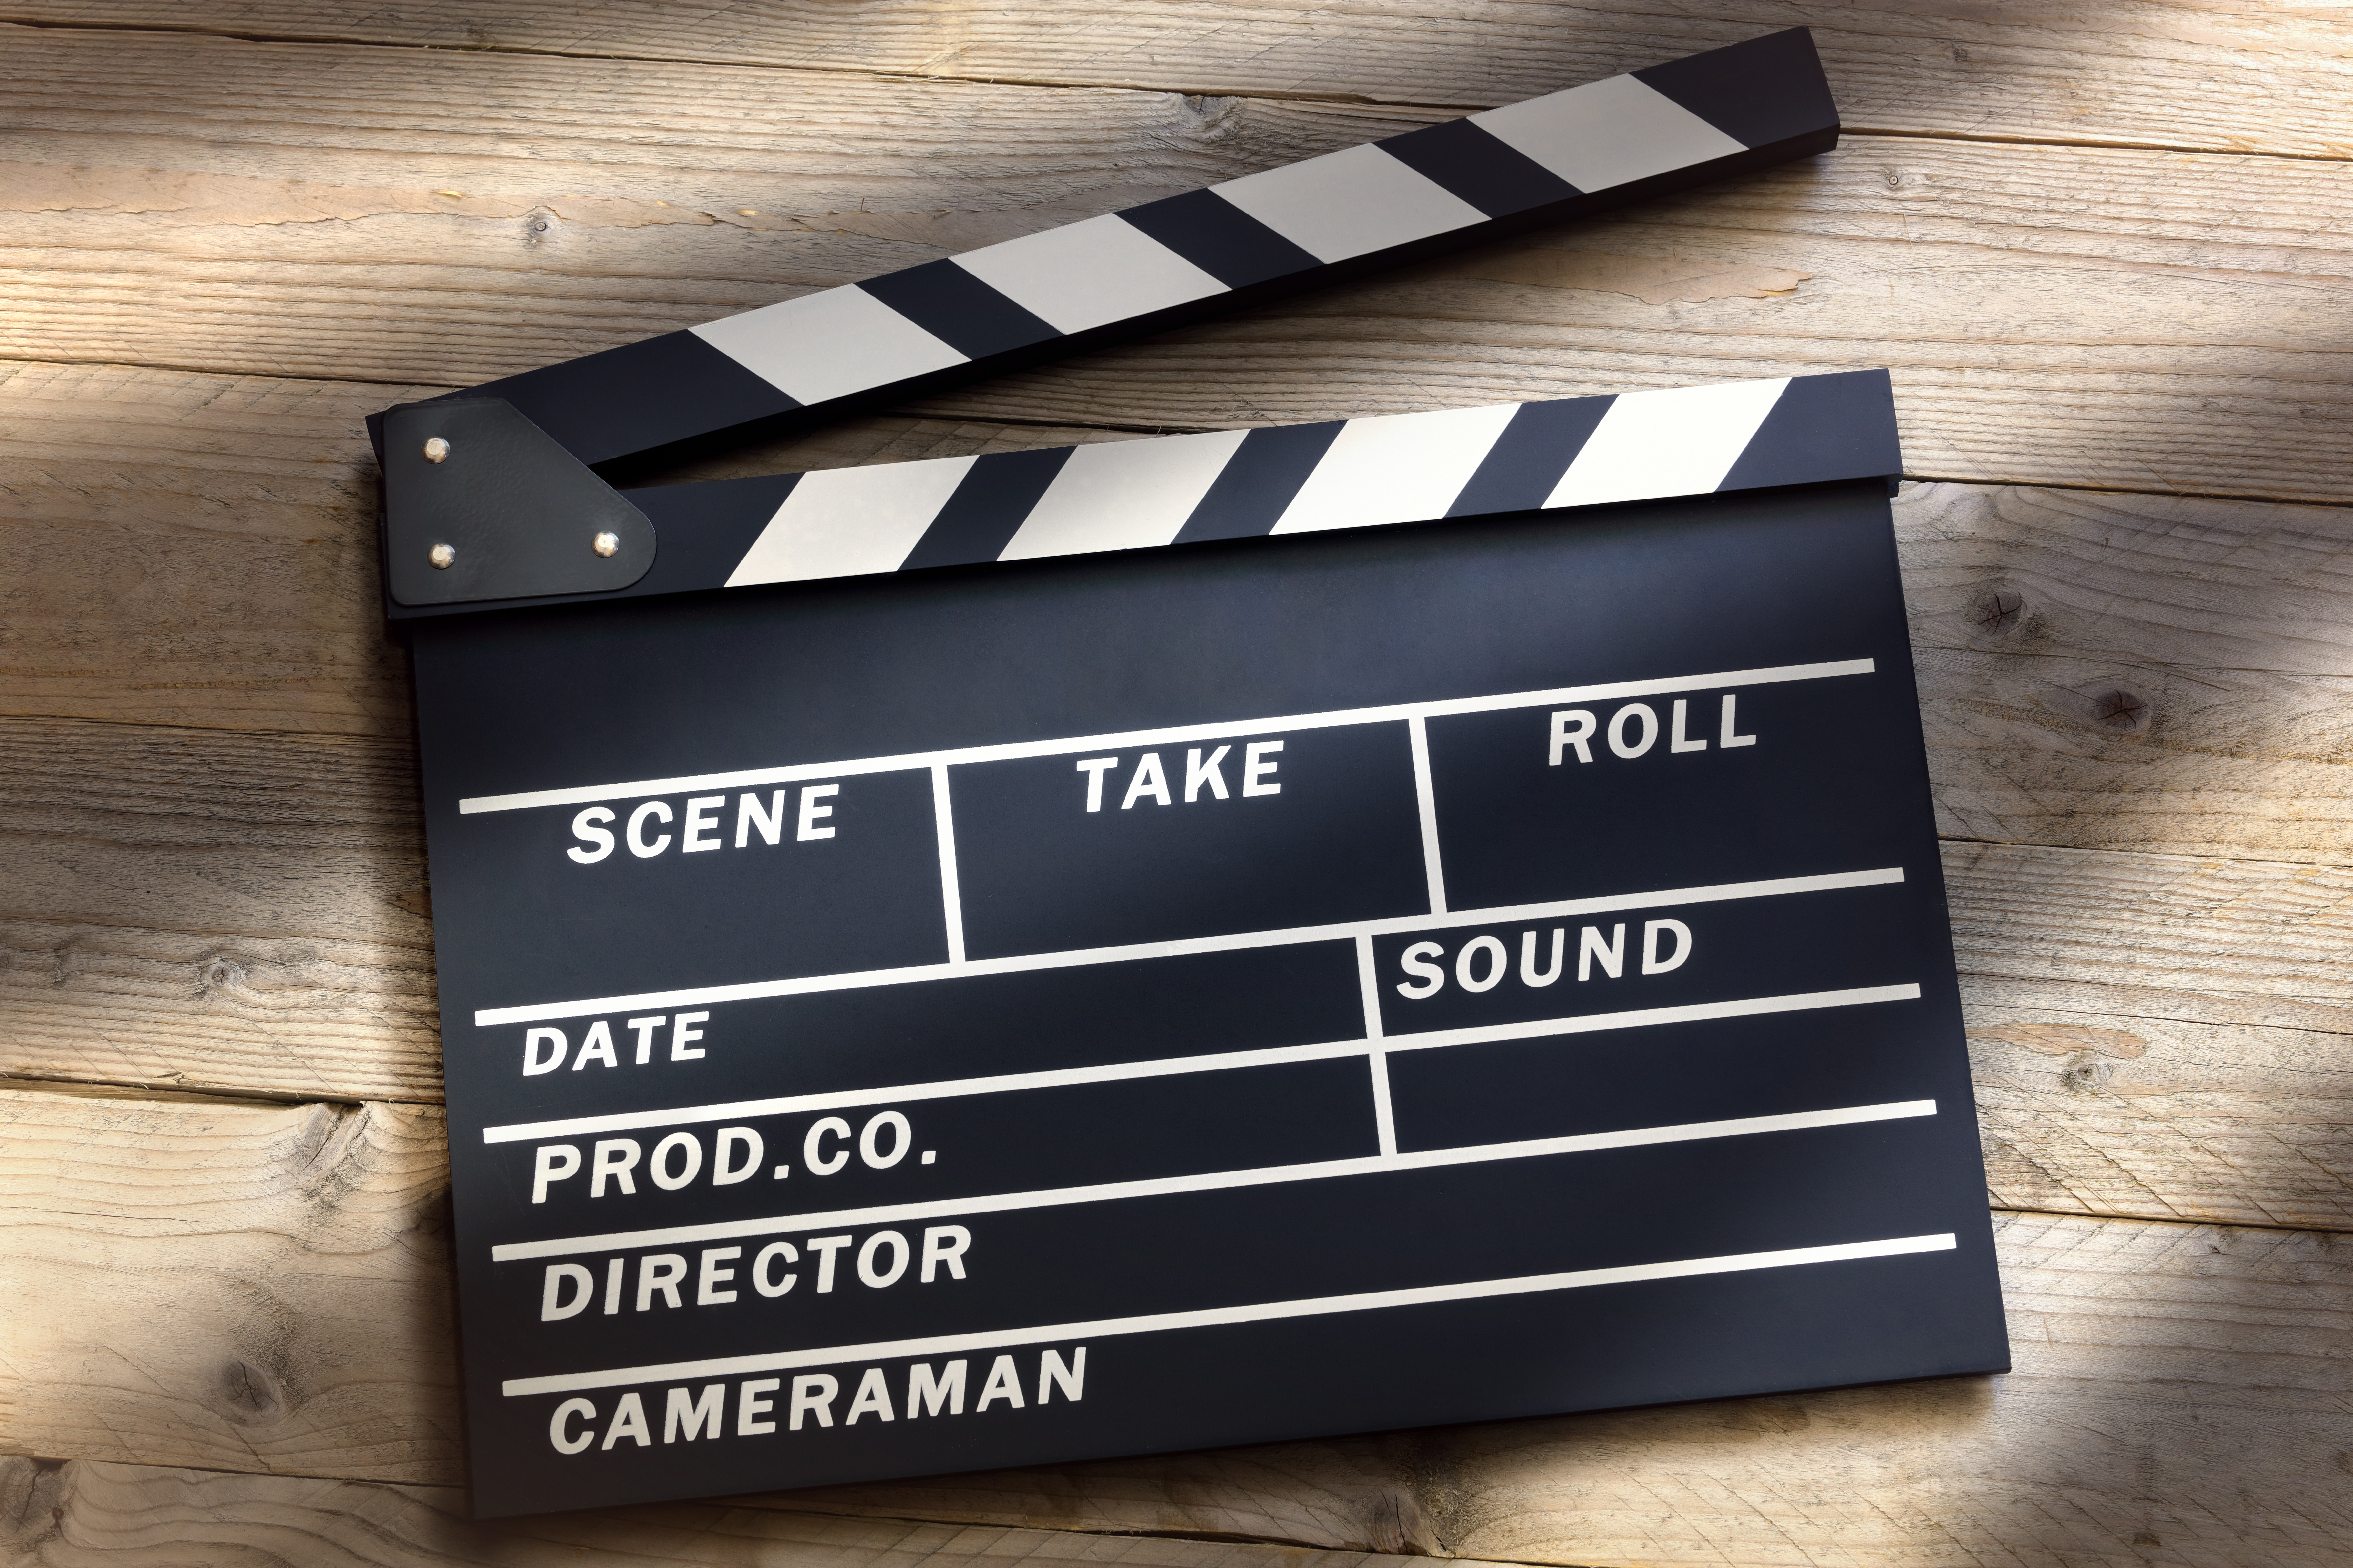 Movie film clap board against a wooden backdrop